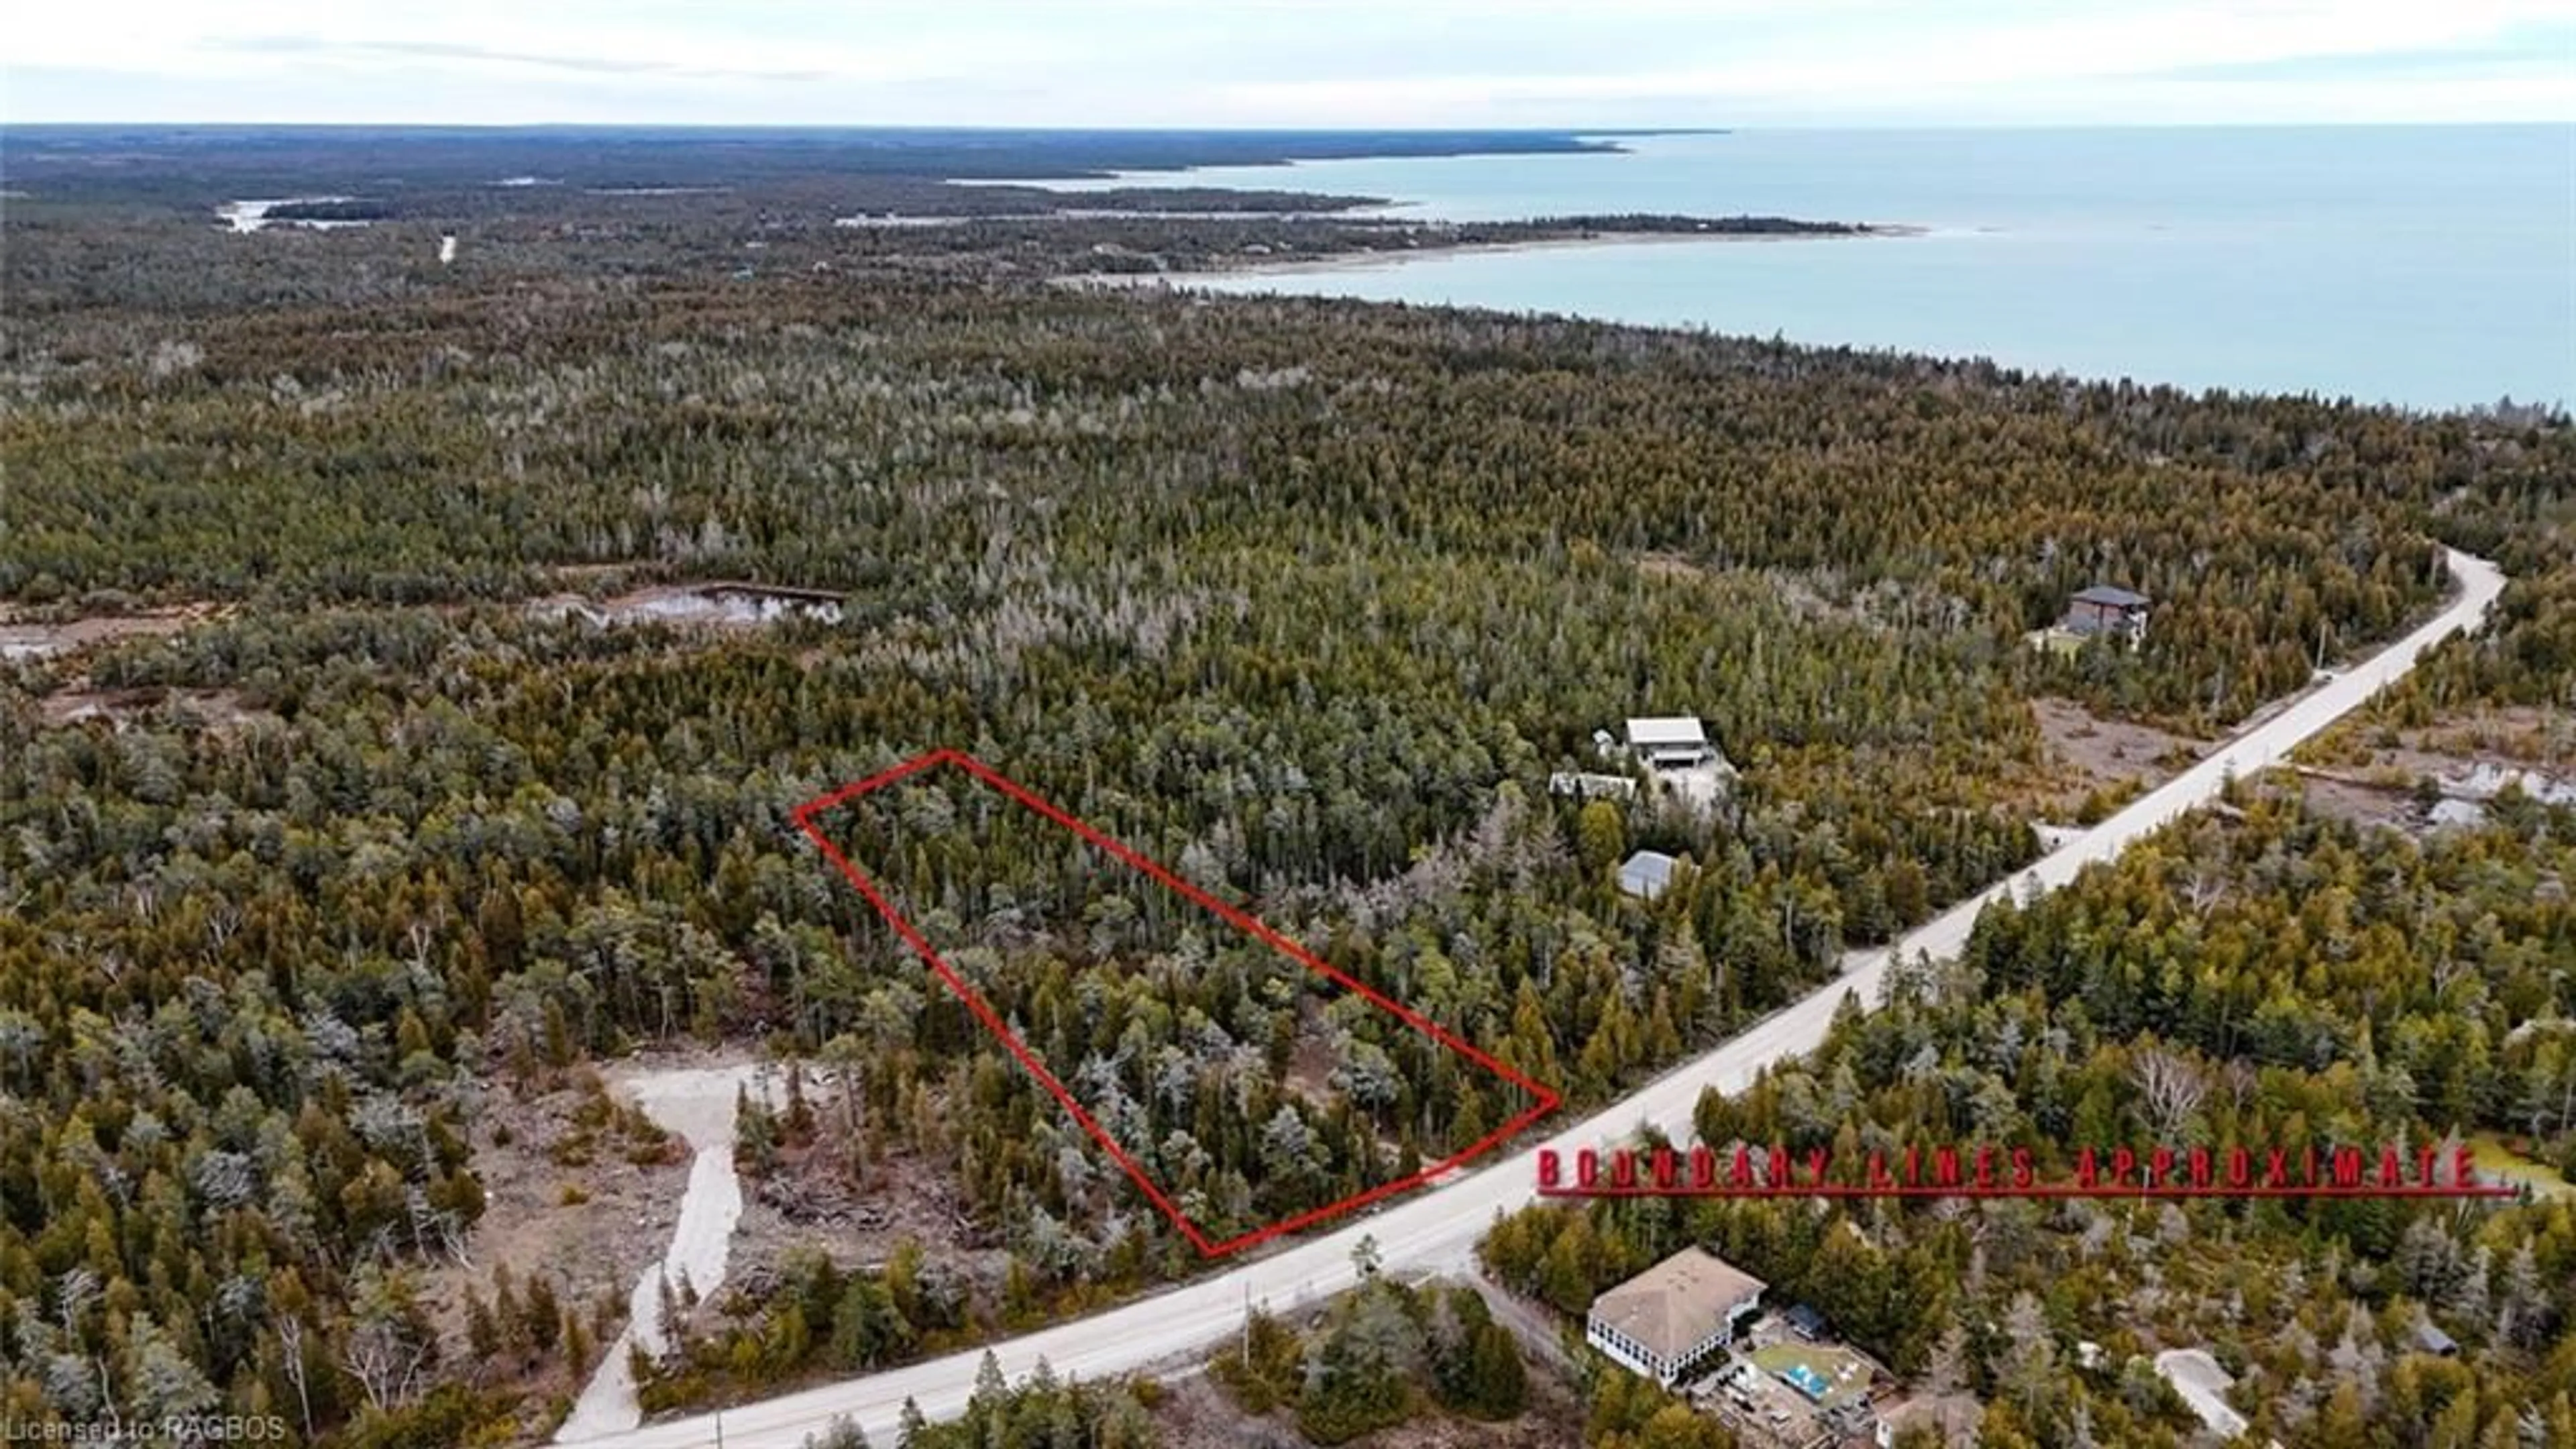 Lakeview for 1035 Dorcas Bay Rd, Tobermory Ontario N0H 2R0